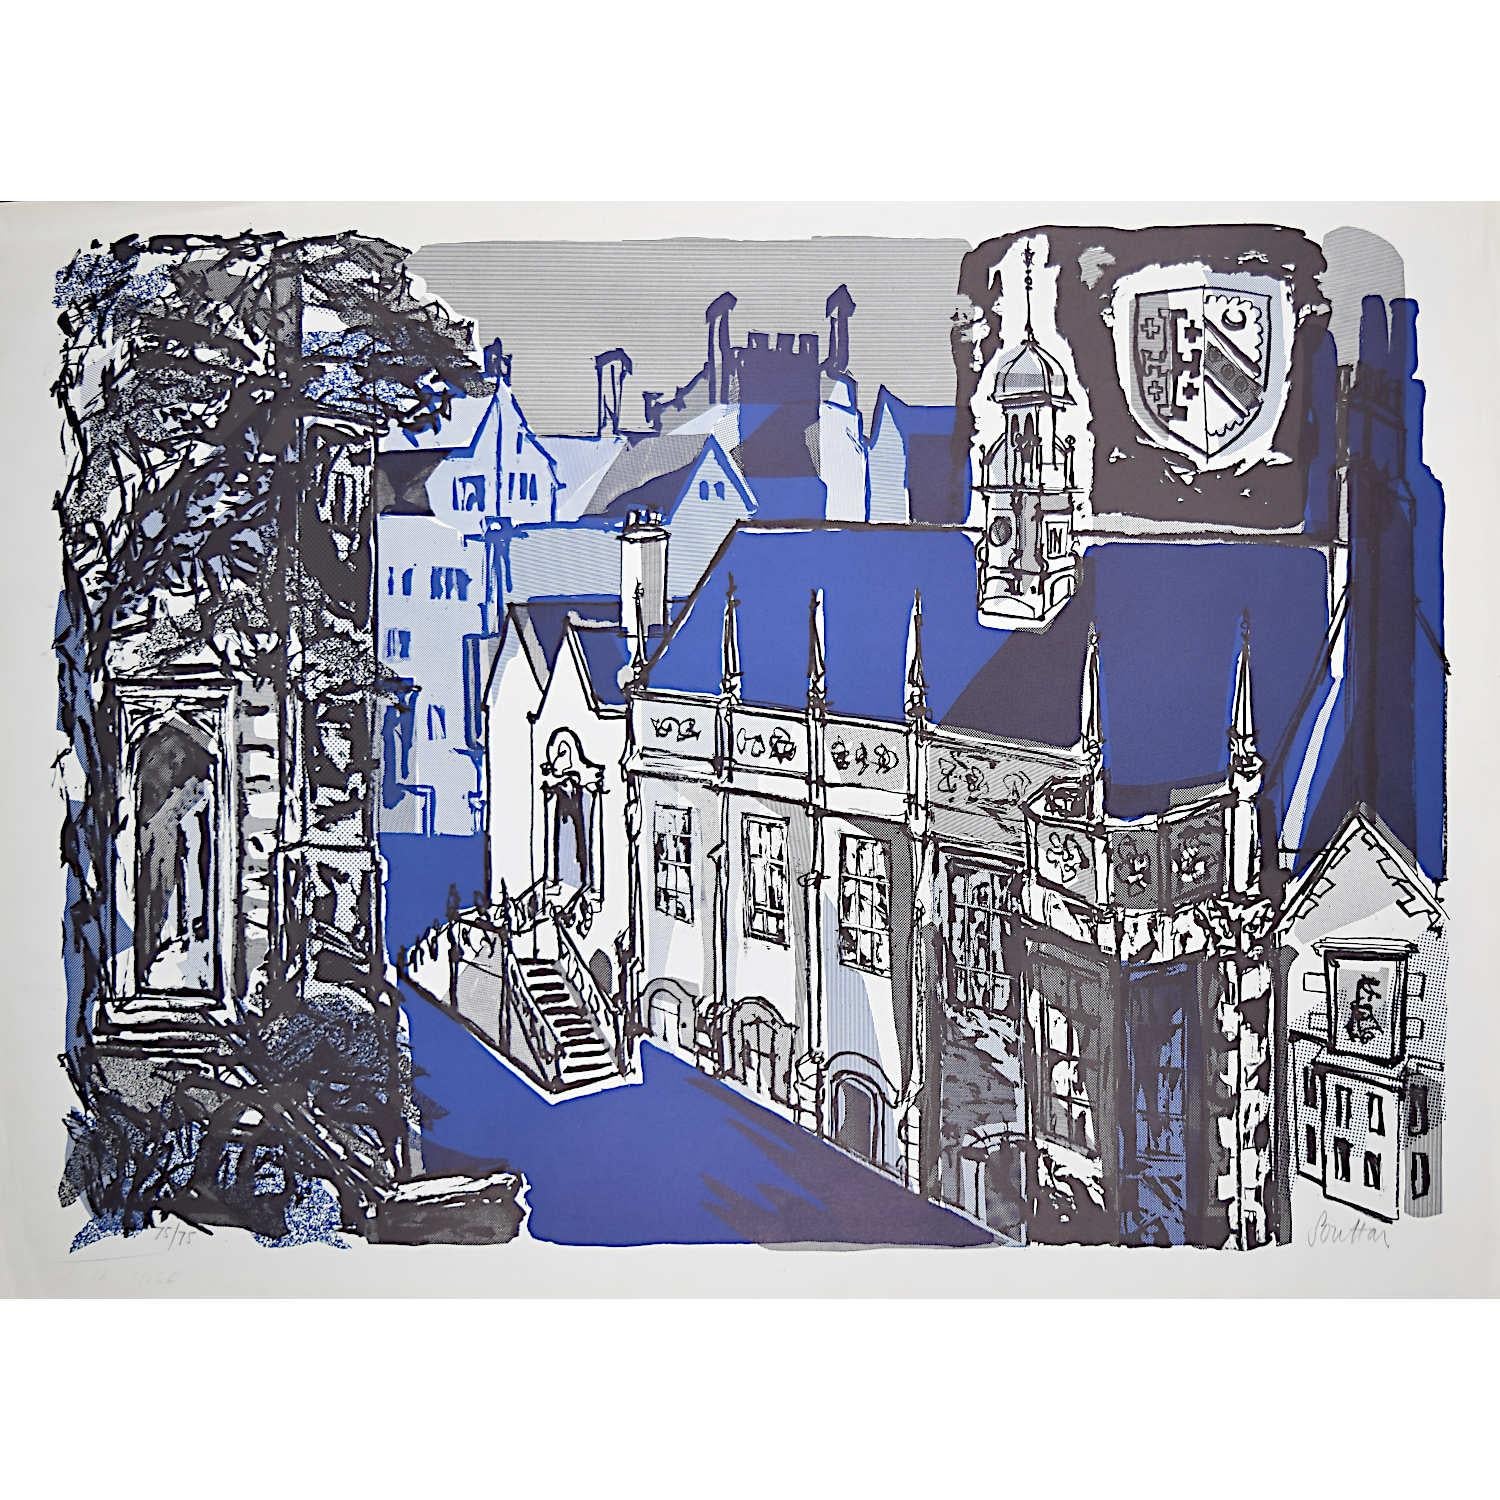 Margaret Souttar (1914-1987)
Selwyn College, Cambridge
Lithograph
77 x 56 cm

Signed in pencil lower right.

Souttar was a Scottish painter and printmaker known for her images of town- and cityscapes. In the early 1960s, she was commissioned to